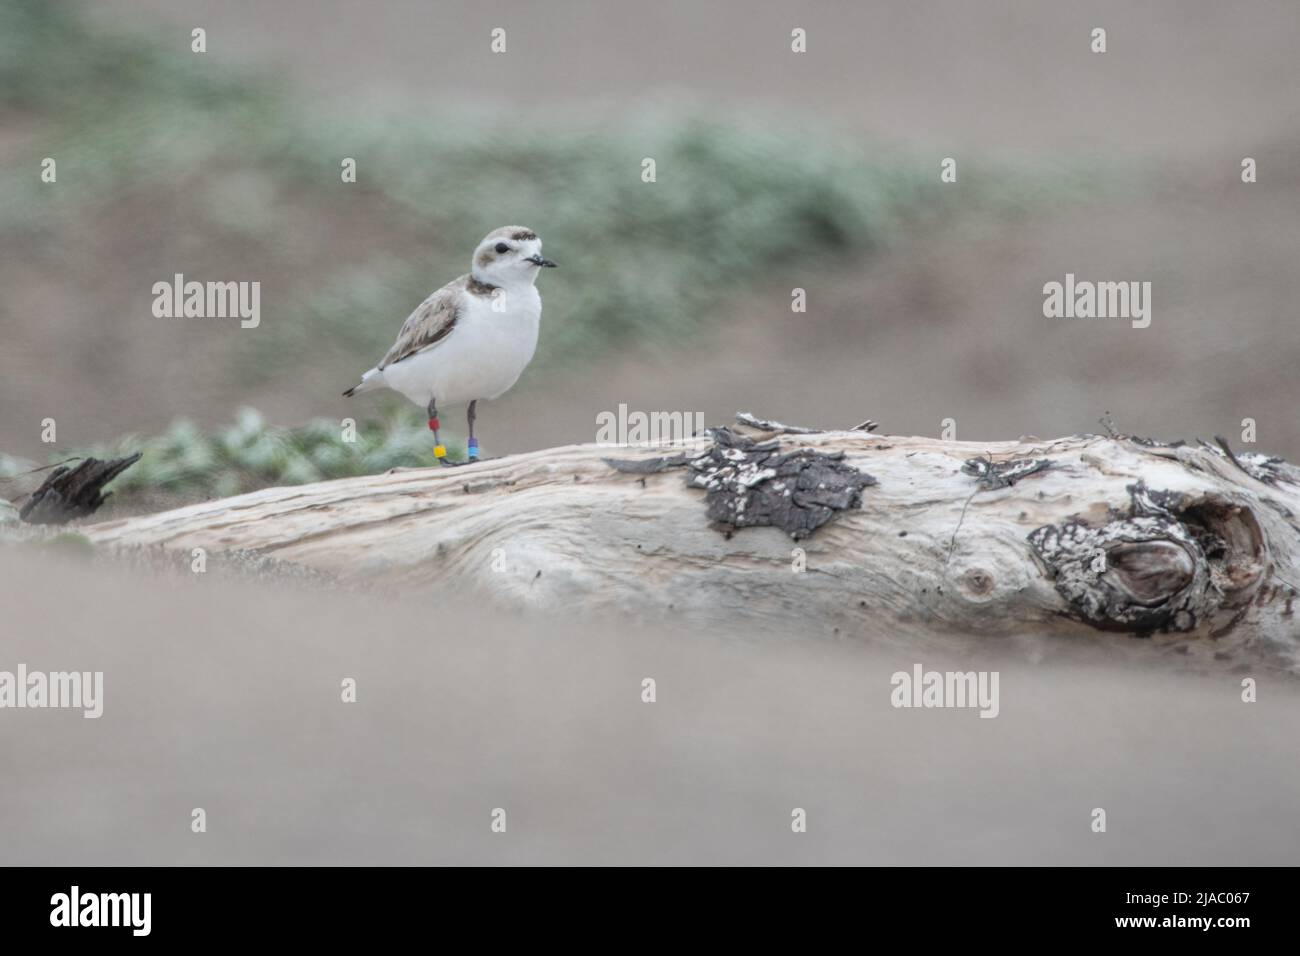 A western snowy plover (Charadrius nivosus), a threatened bird species on the beach in Point Reyes National Seashore in California. Stock Photo